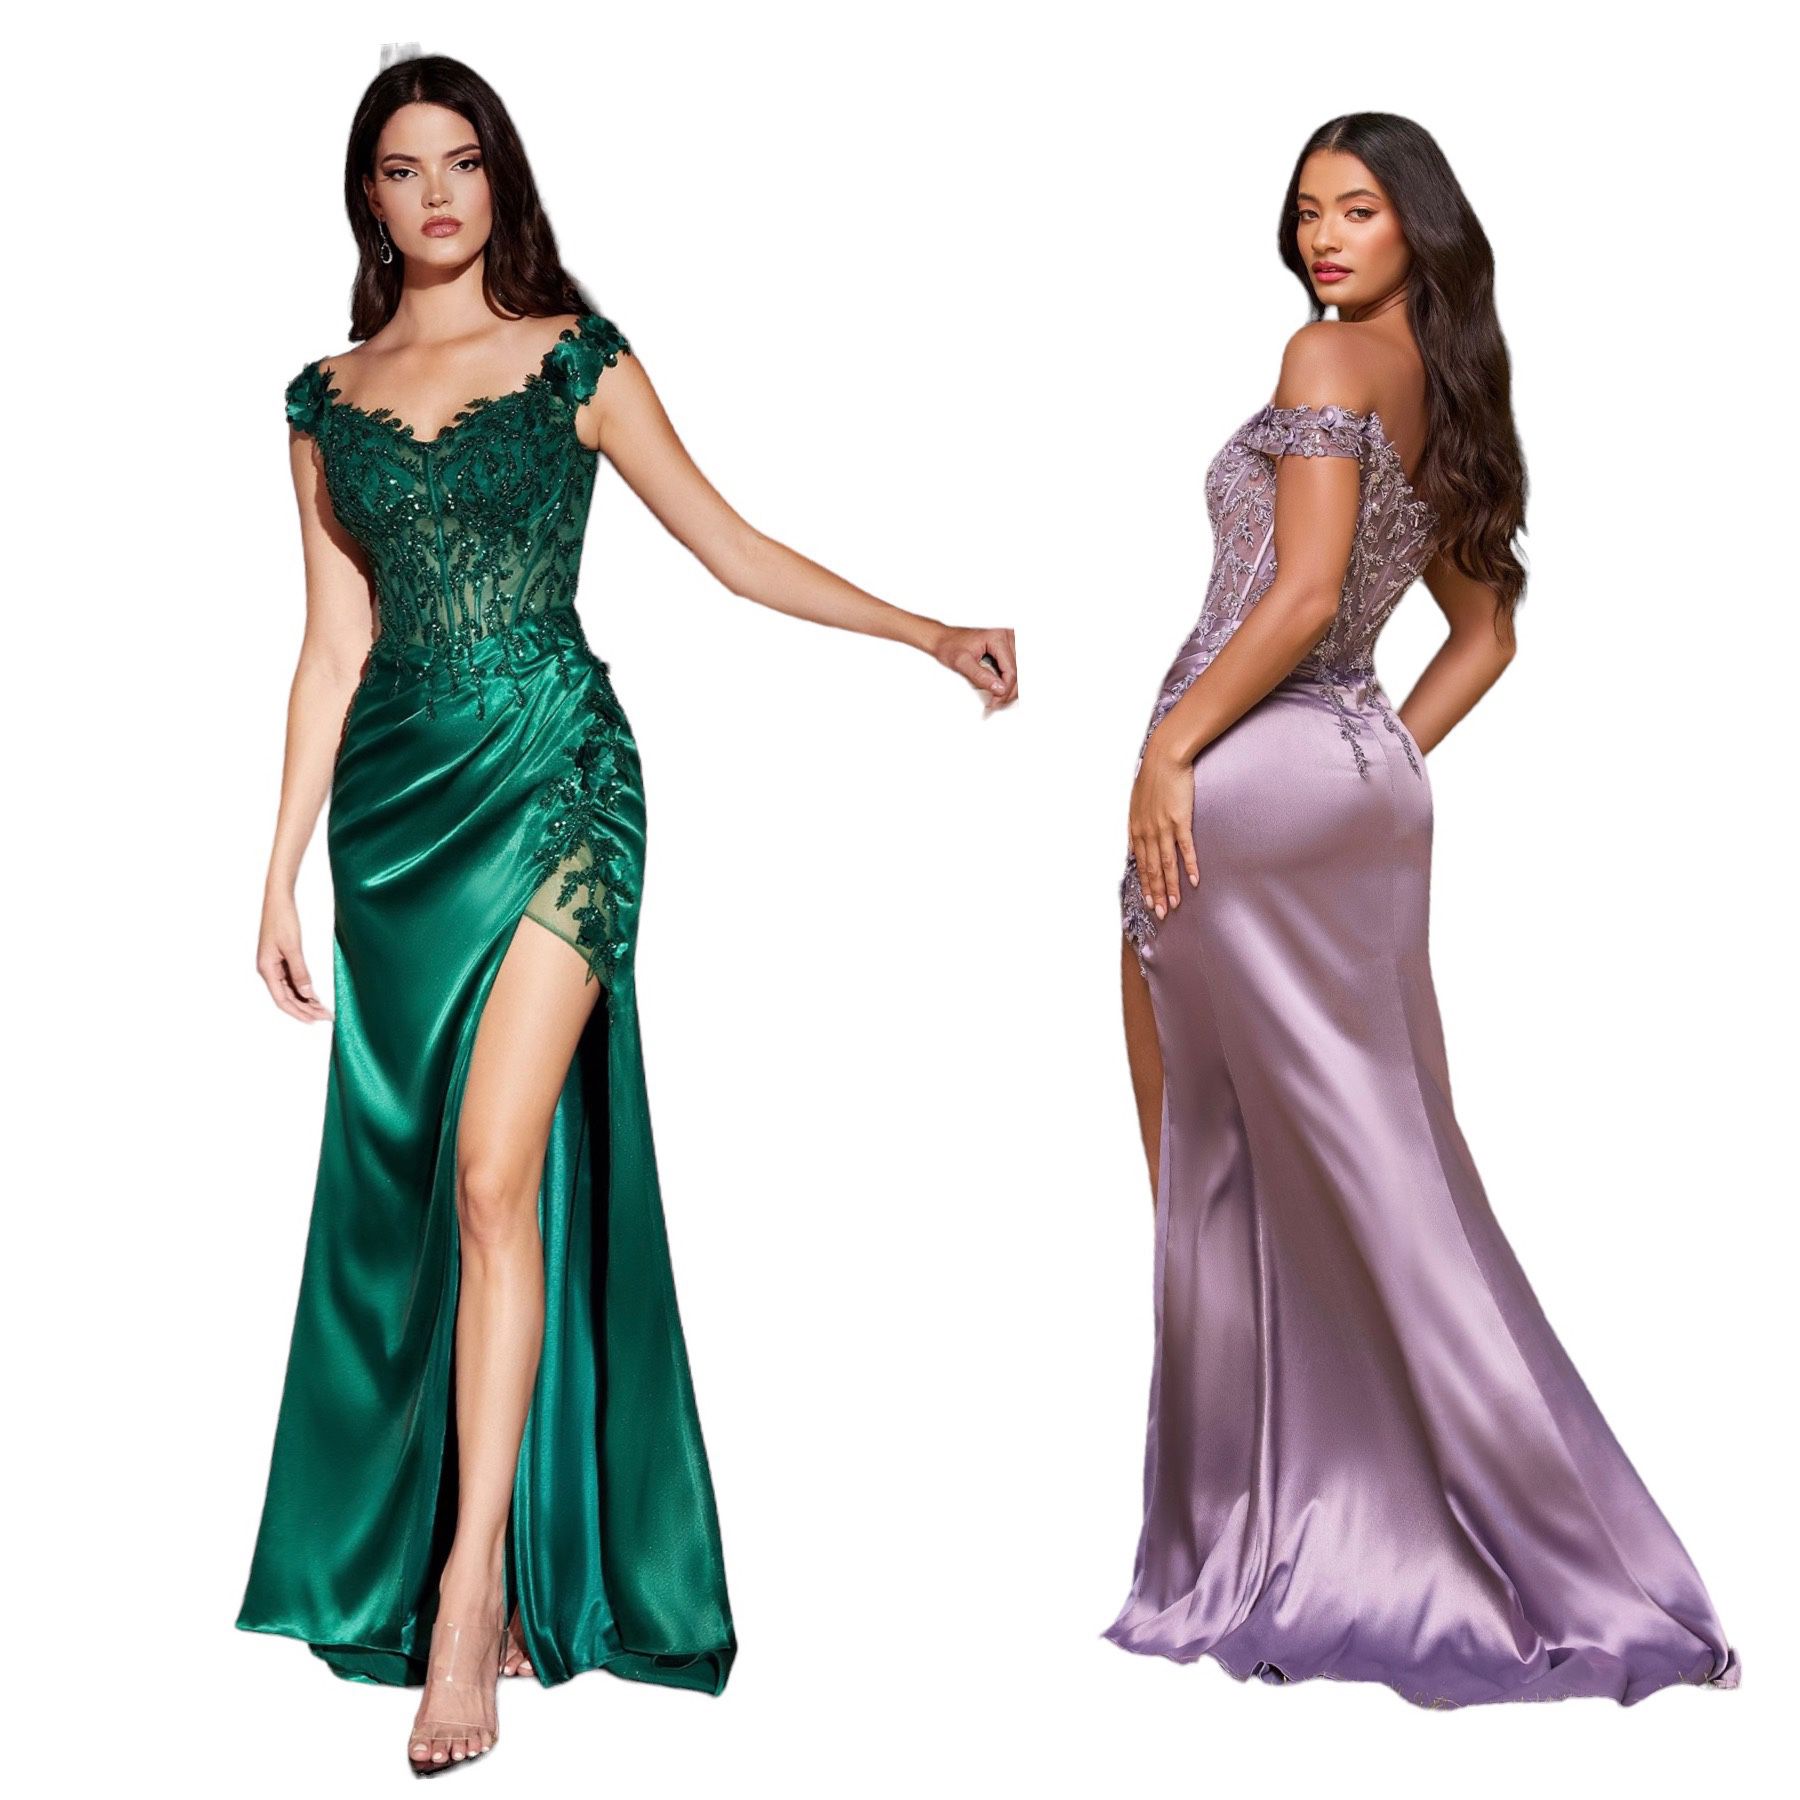 New with tags Satin Long Formal Dress & Prom Dress $195